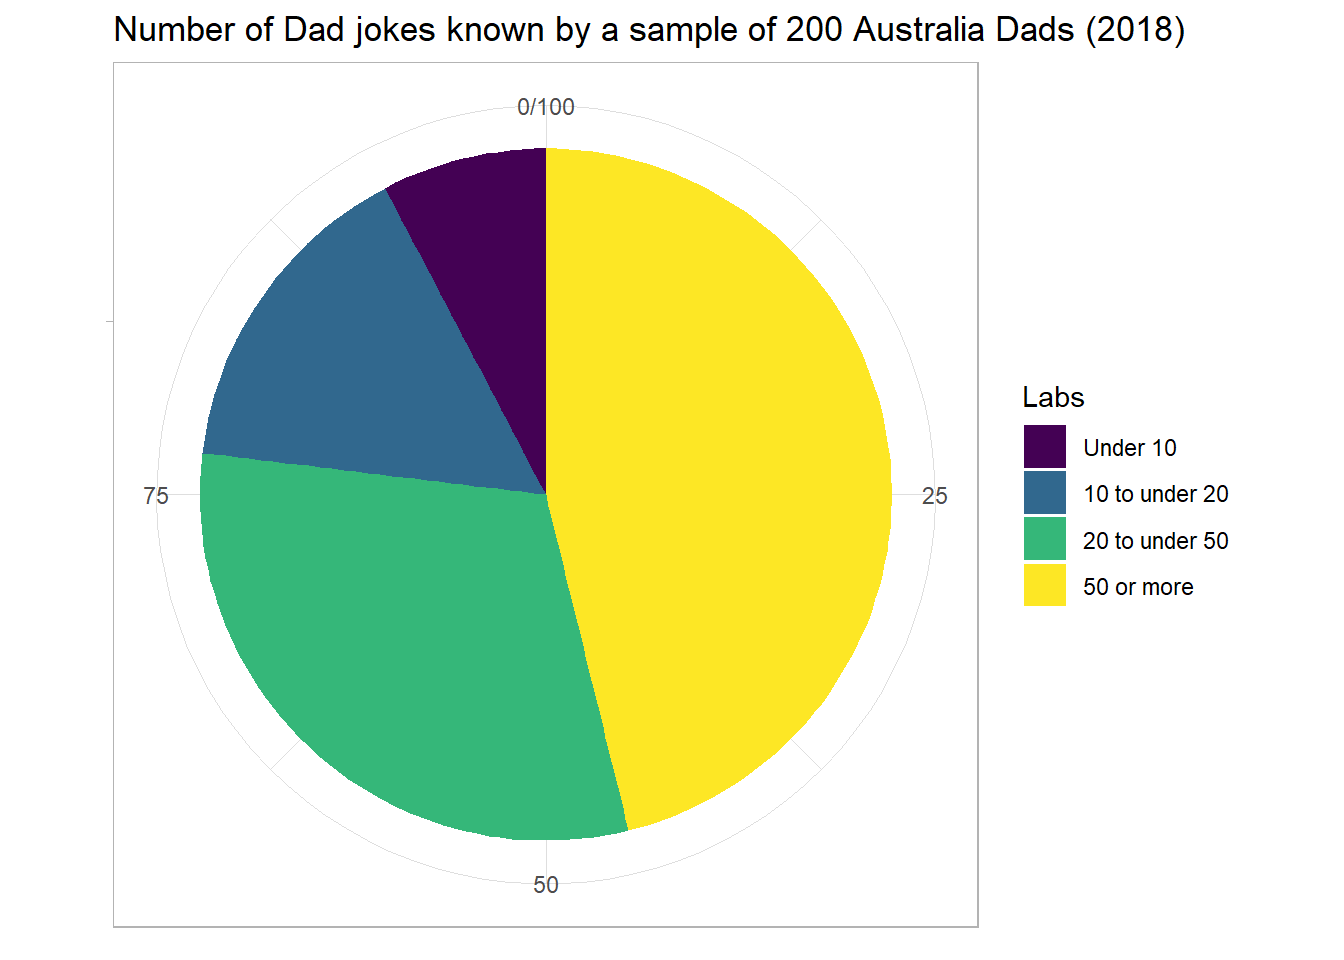 The number of jokes known by a sample of 200 Australian Dads (PJ Morgan Surveys, 2020)